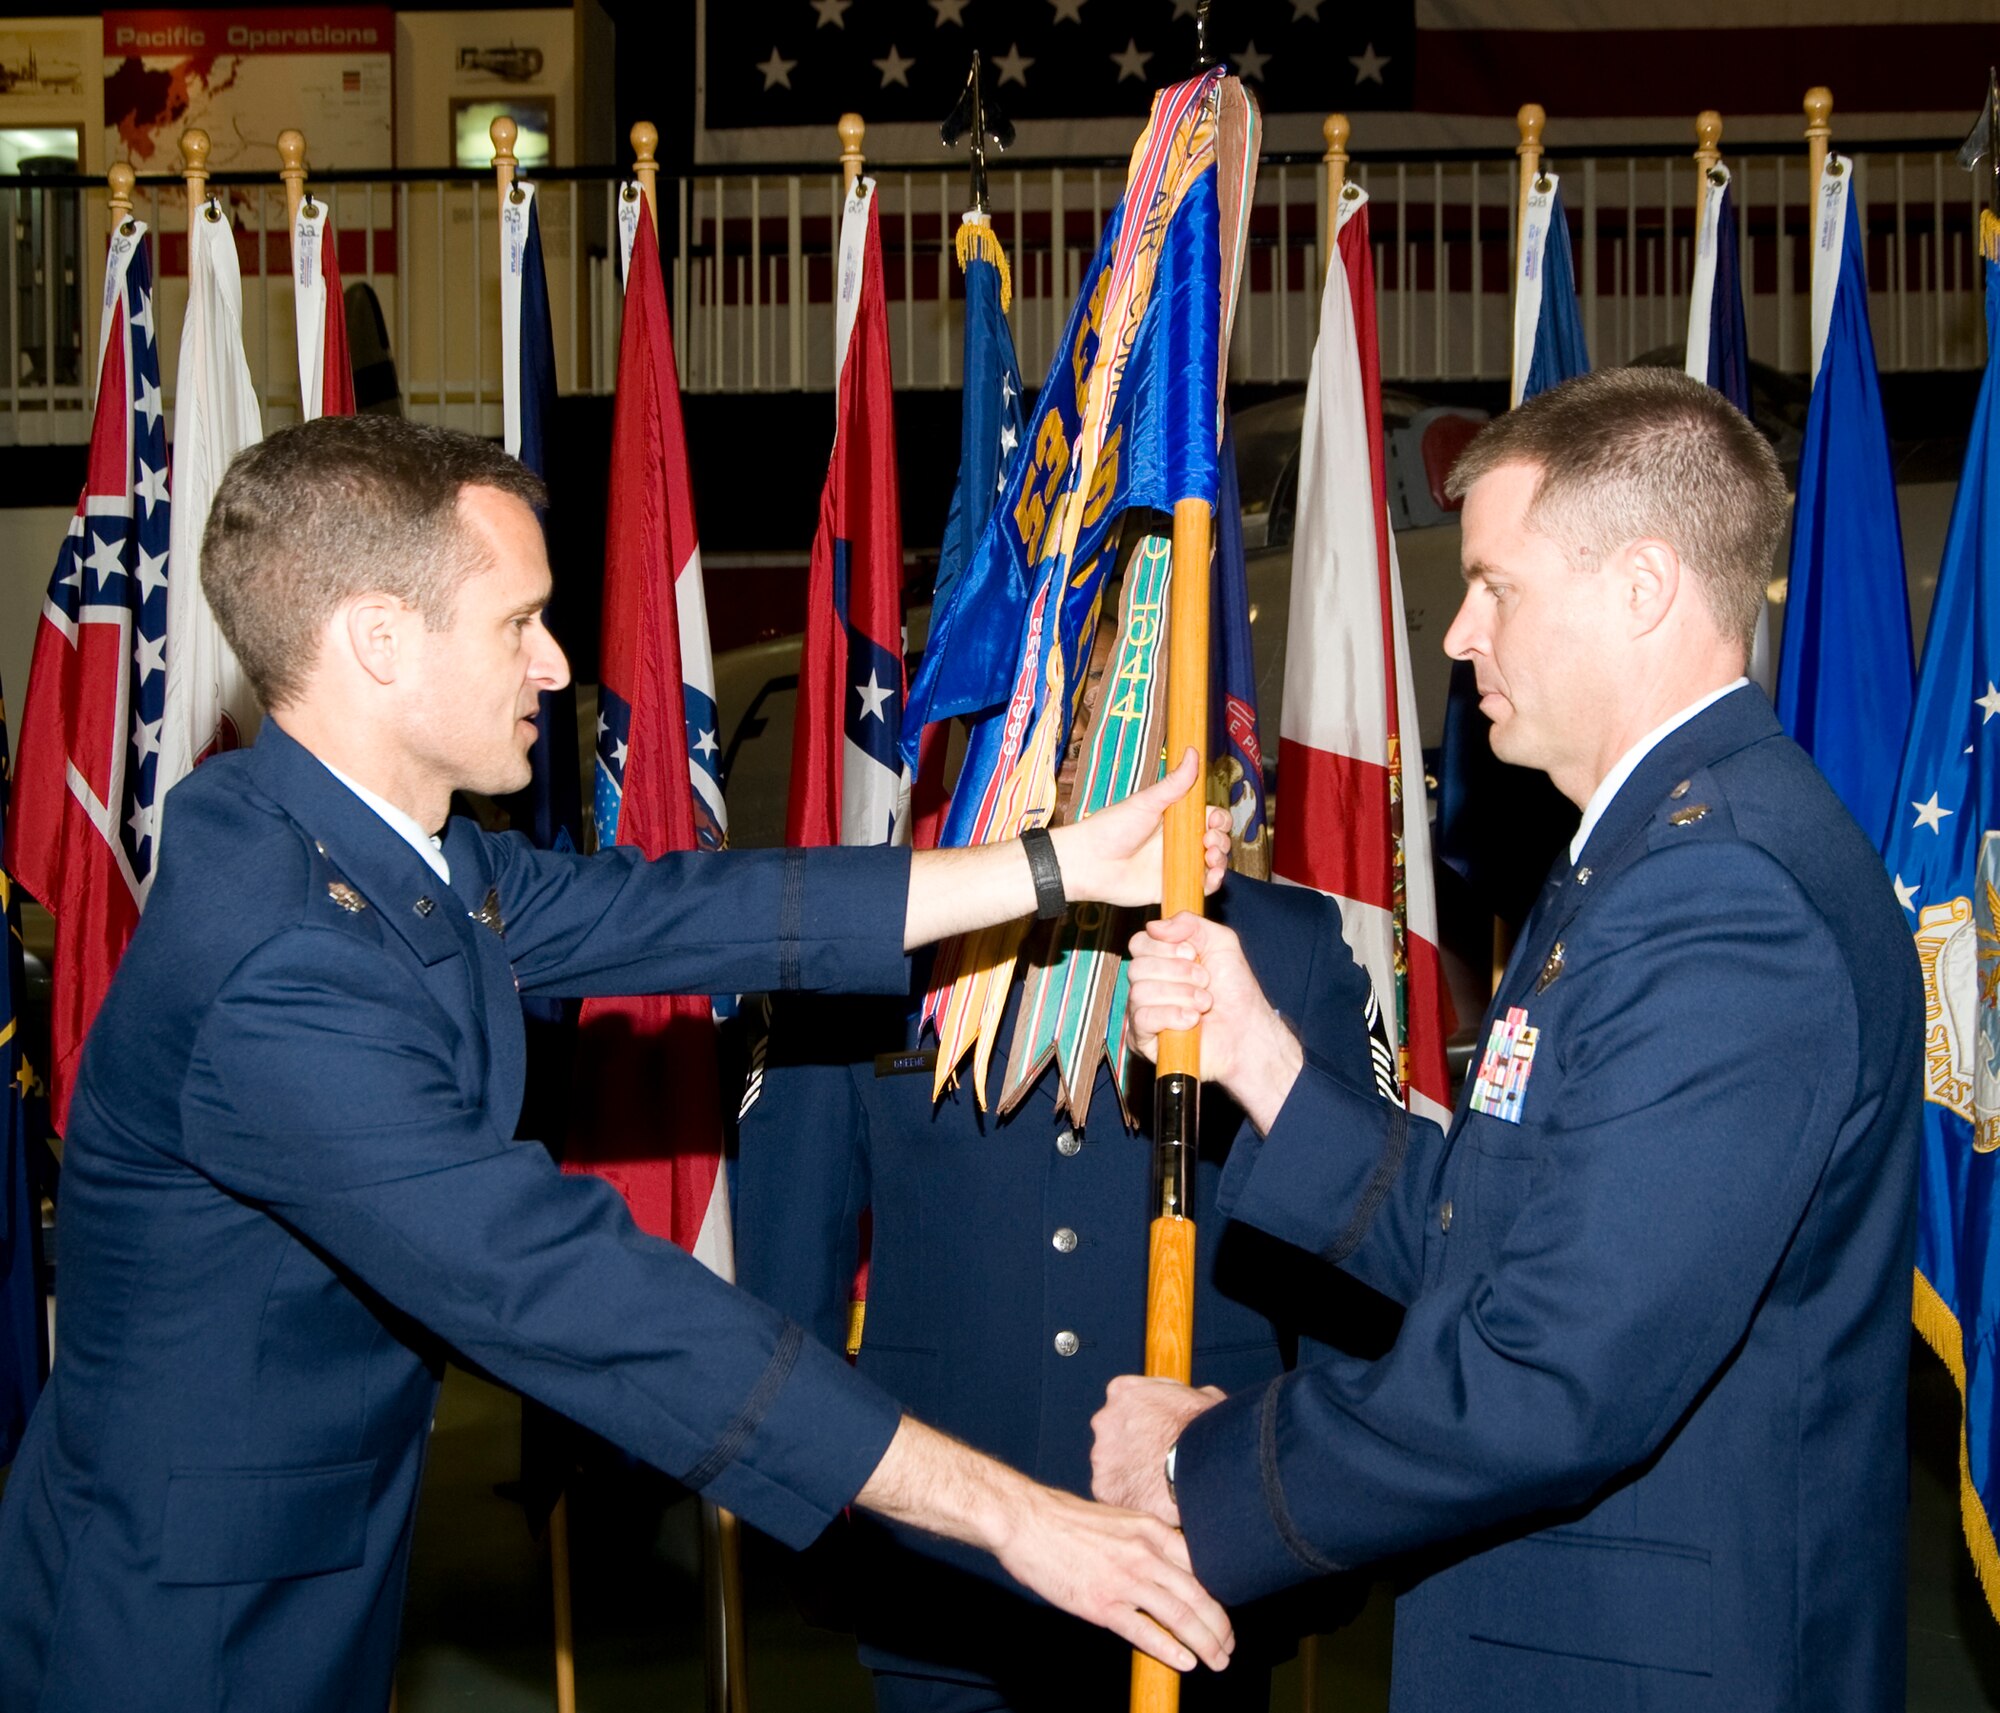 Lt. Col. Gregory Patschke receives his 36th Electronic Warfare Squadron guidon from the Lt. Col. Melvin Peterson, 53d Electronic Warfare Group acting commander, during the 36th EWS change of command ceremony at the Air Armanent Center May 2 at Eglin Air Force Base, Fla.  He took the reins from Lt. Col. John "Hap" Arnold.  U.S. Air Force photo. 